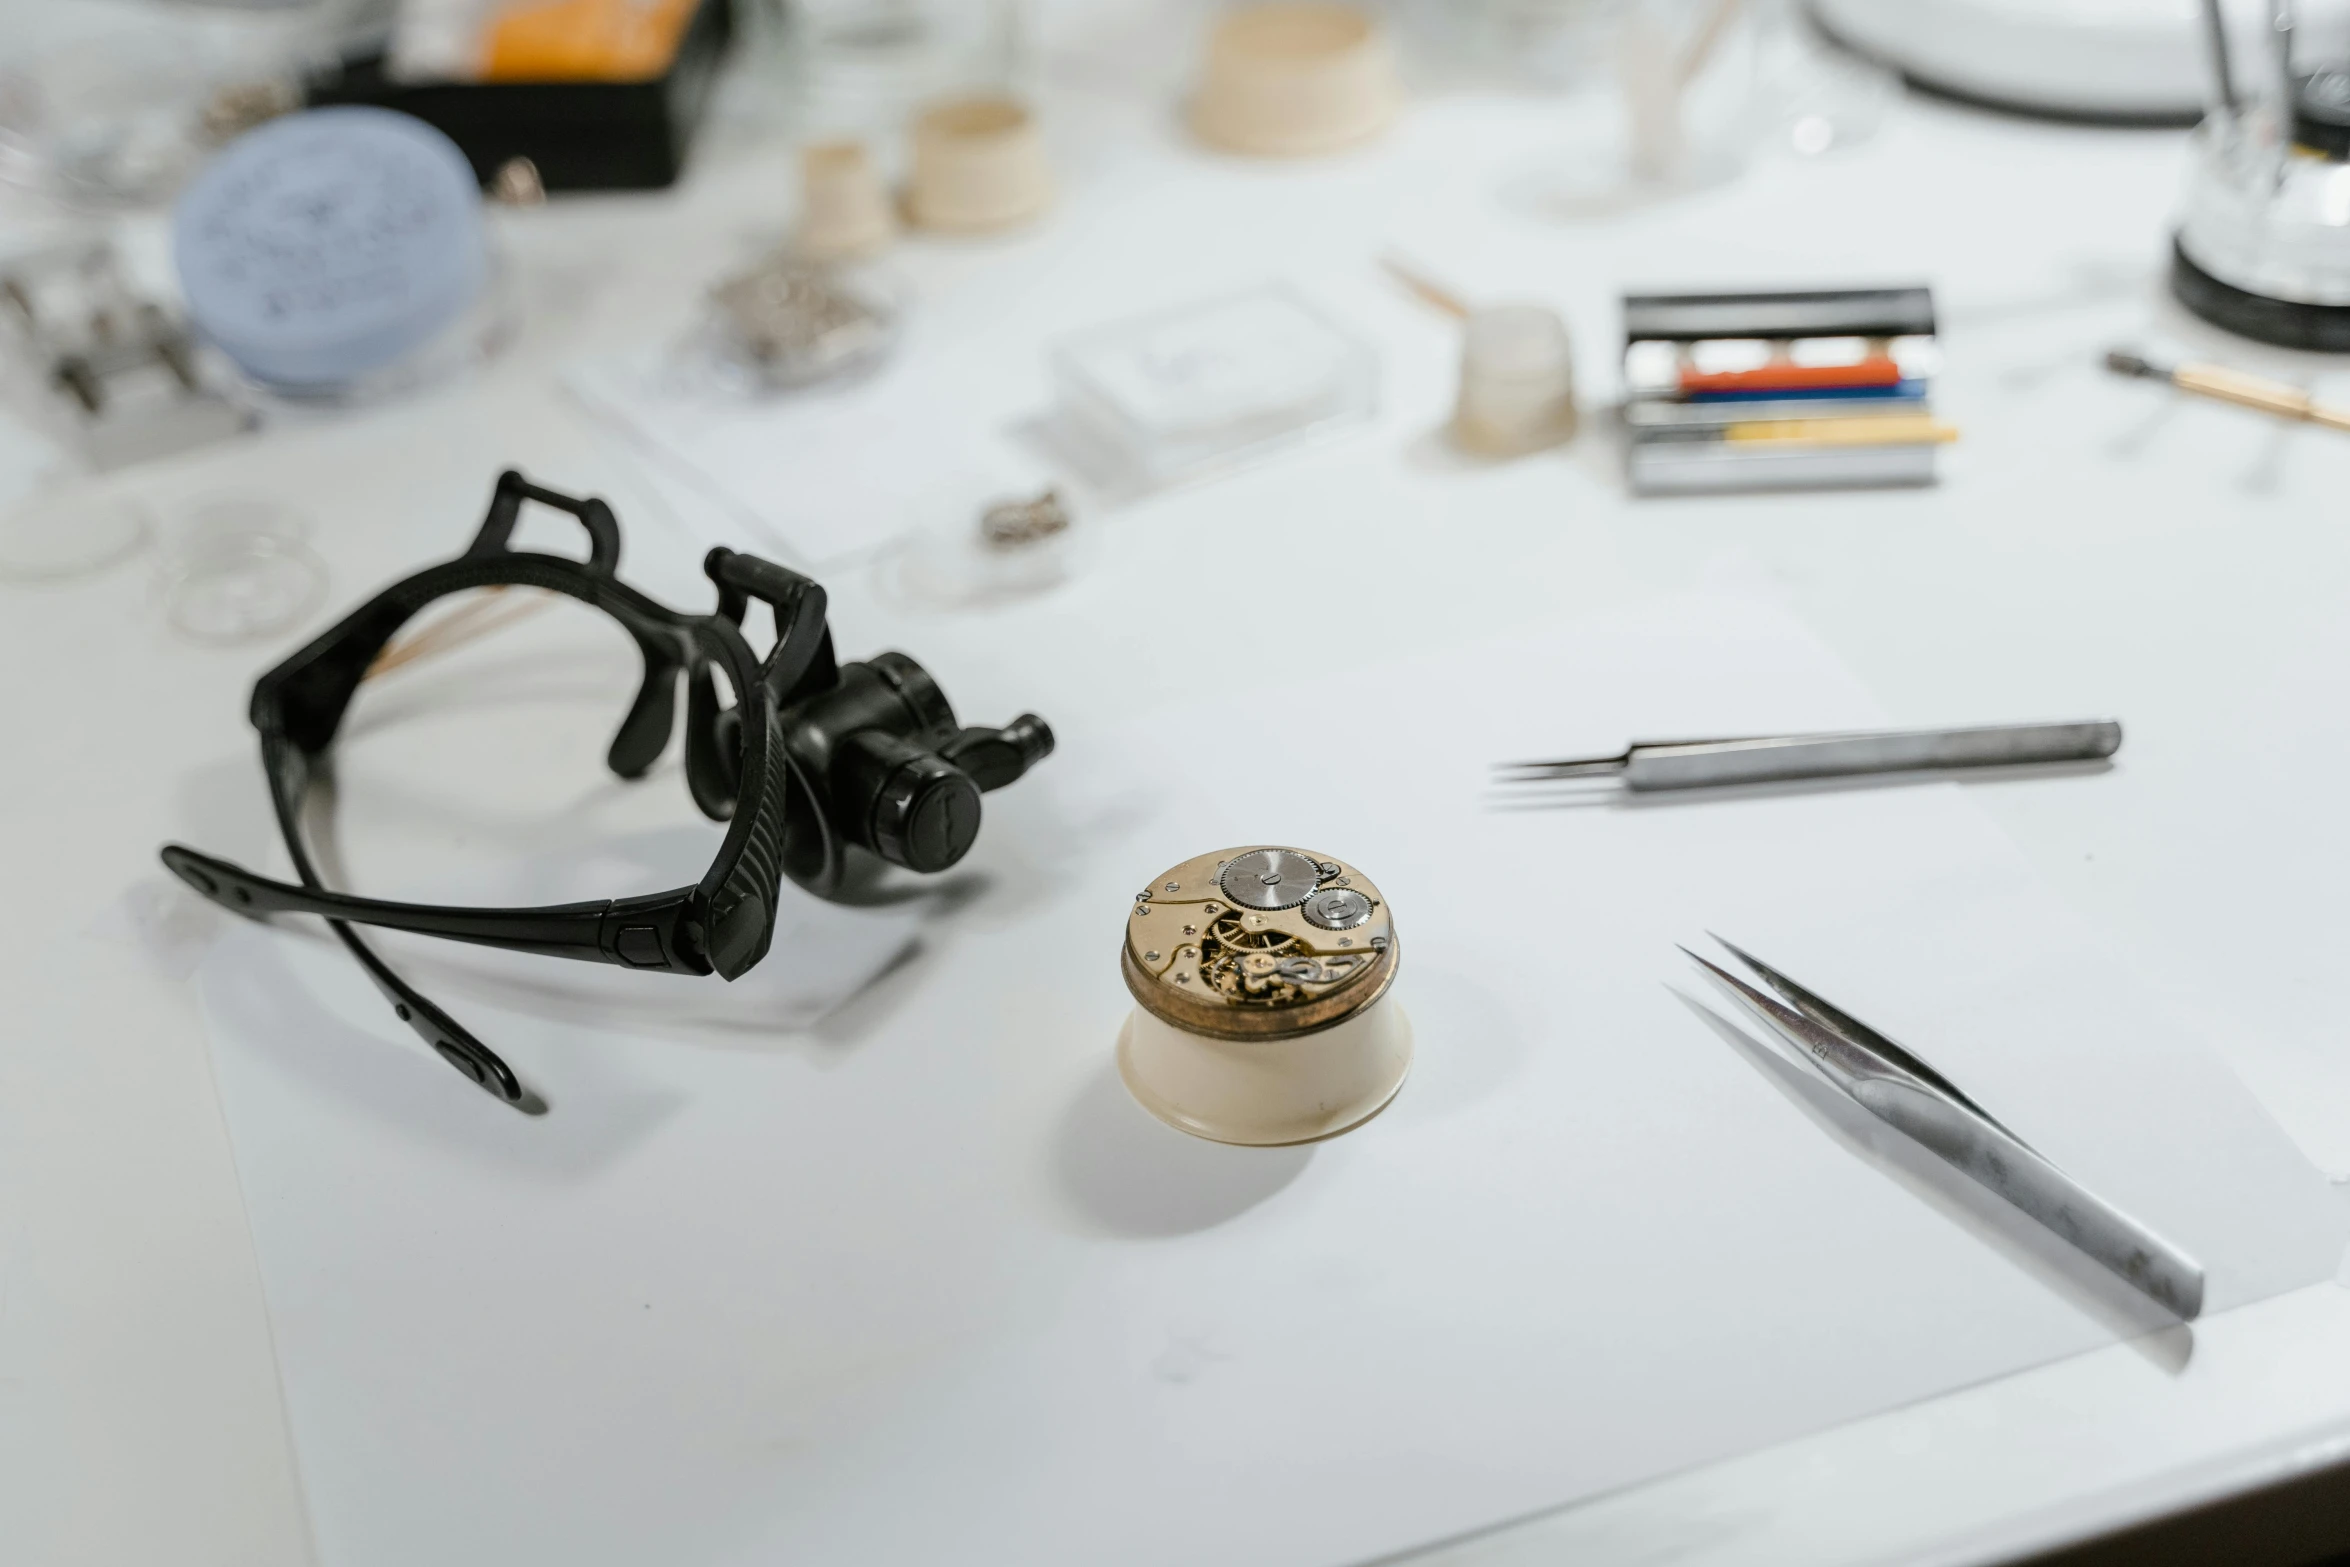 a pair of glasses sitting on top of a table, inspired by Frederik de Moucheron, arbeitsrat für kunst, lv jewelry, detailed product image, workbench, with small object details